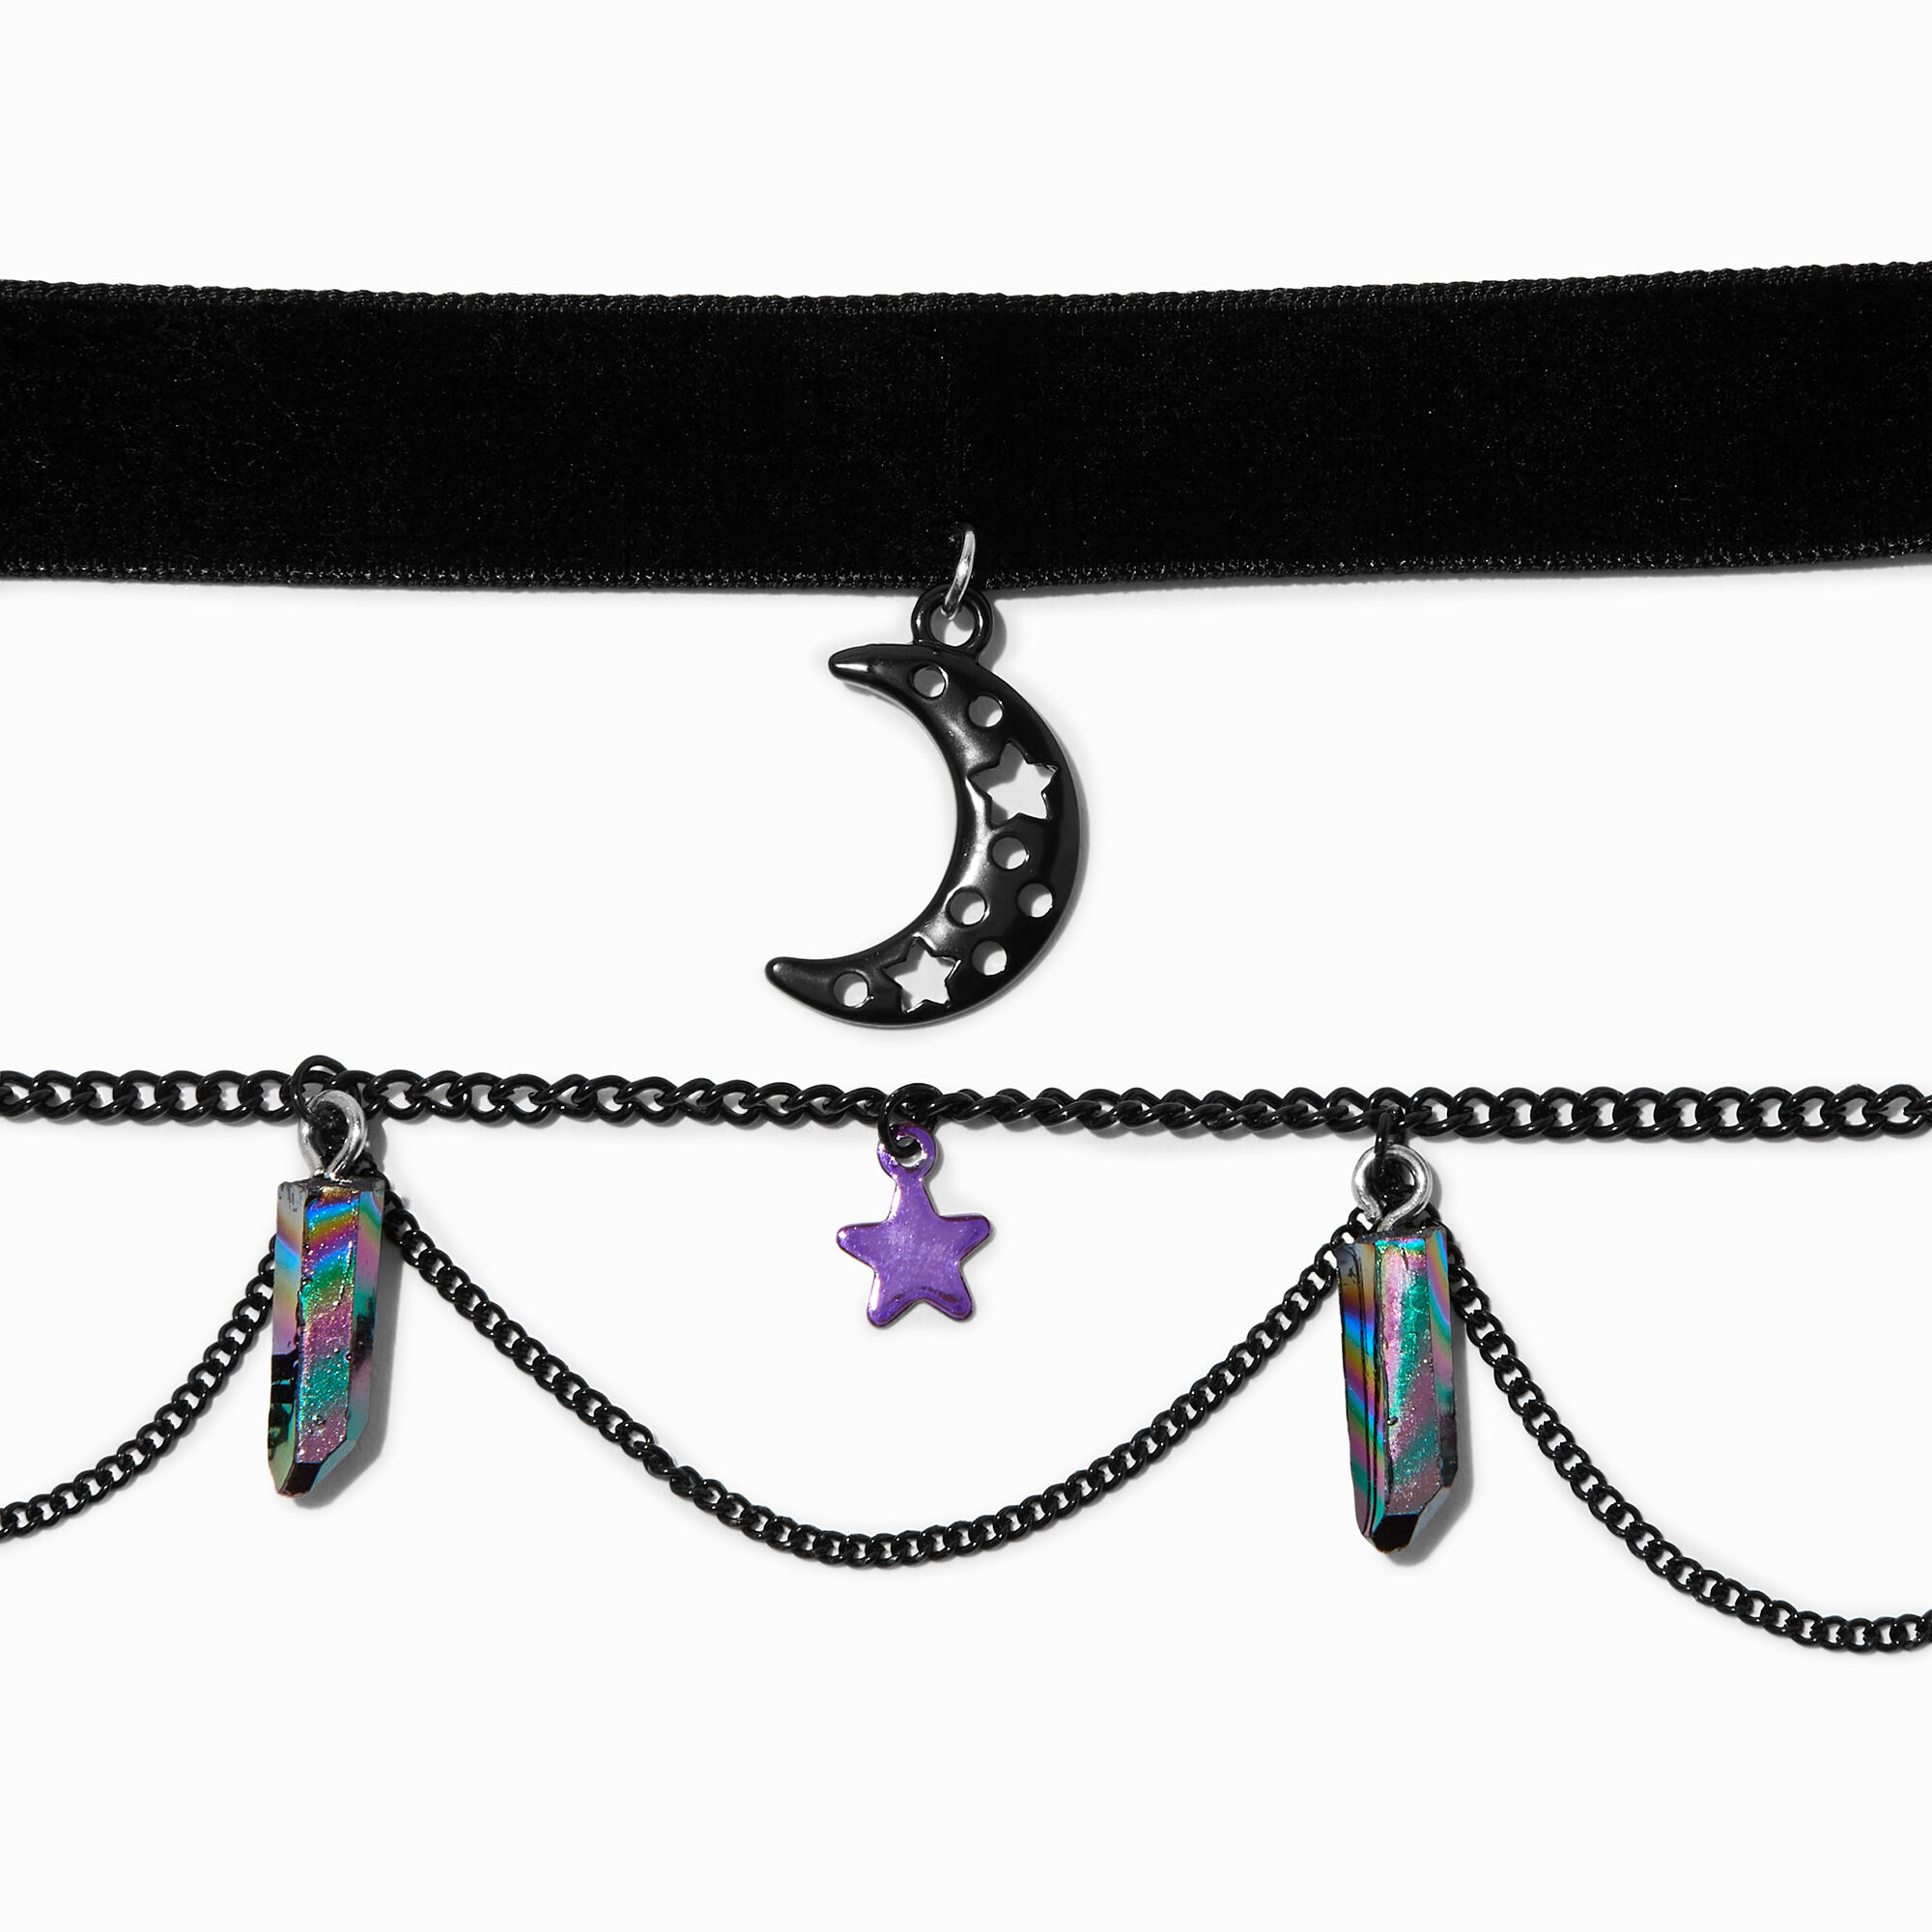 View Claires Mystical Charms Choker Necklace Set 2 Pack Black information